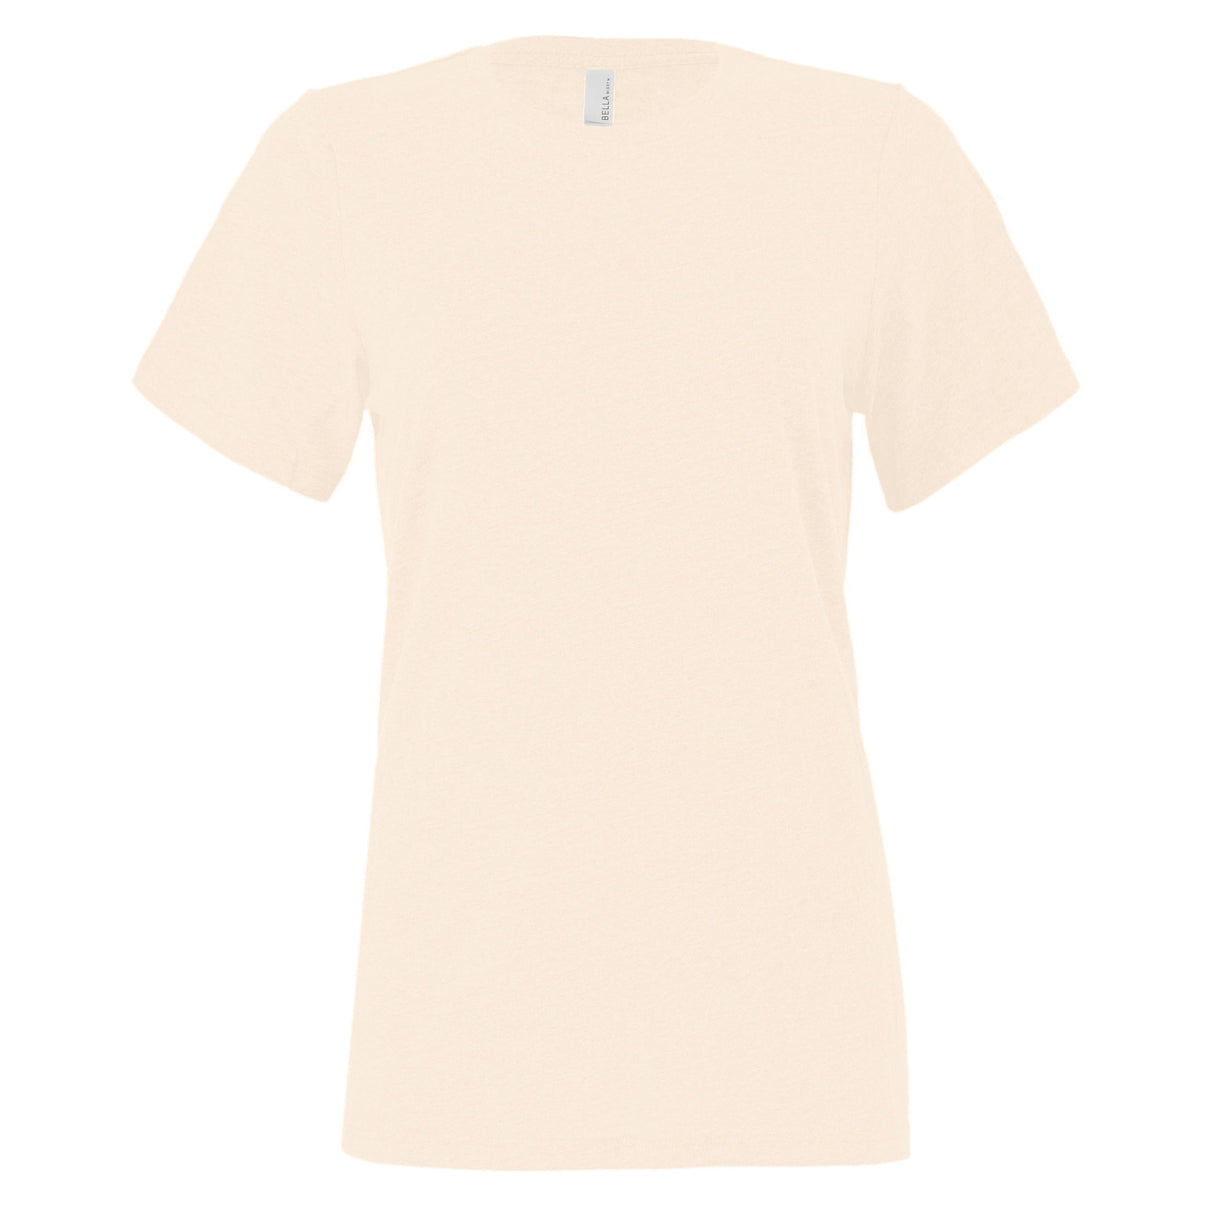 Bella Canvas Women's Relaxed Jersey Short Sleeve Tee - Heather Natural